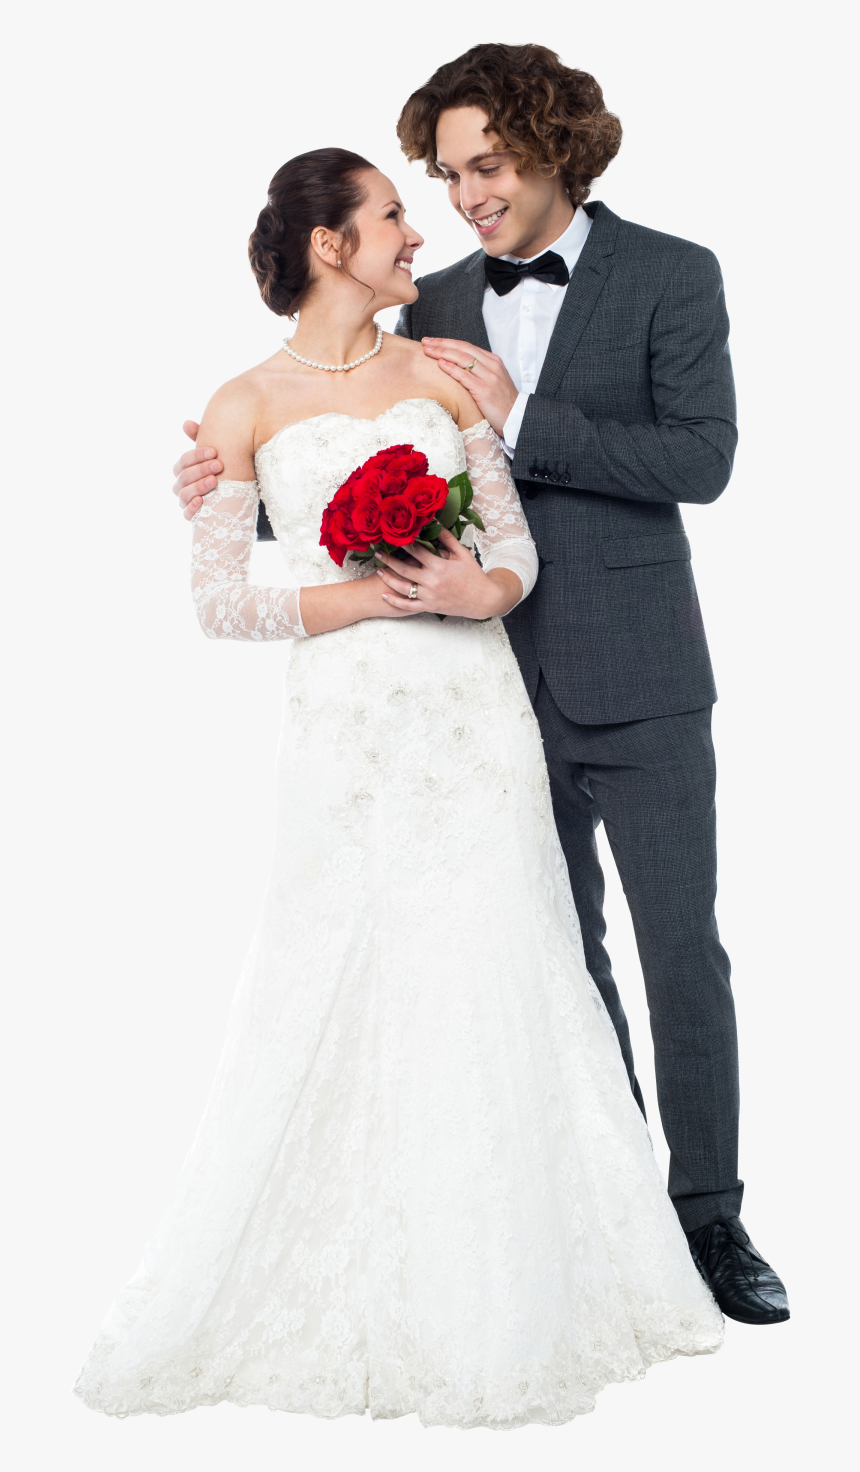 Wedding Couple Png - Wedding Couple Full Hd, Transparent Png, Free Download